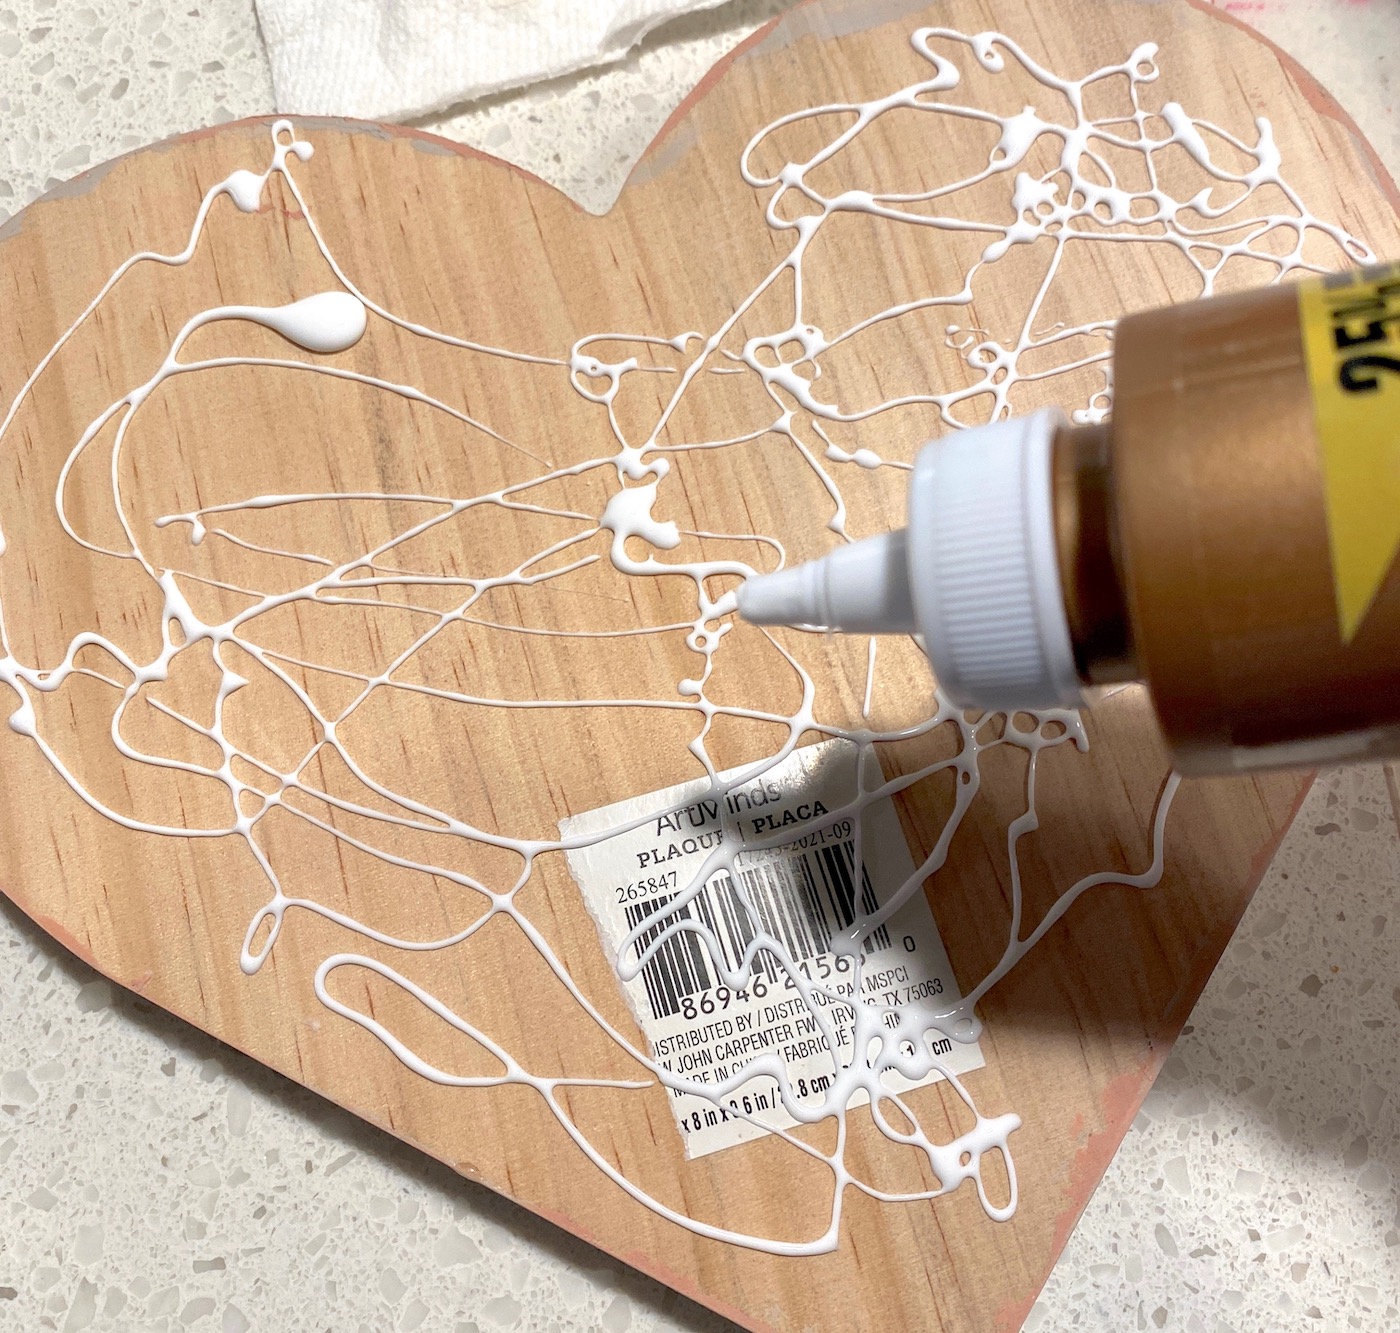 Applying glue to the back of the wood heart